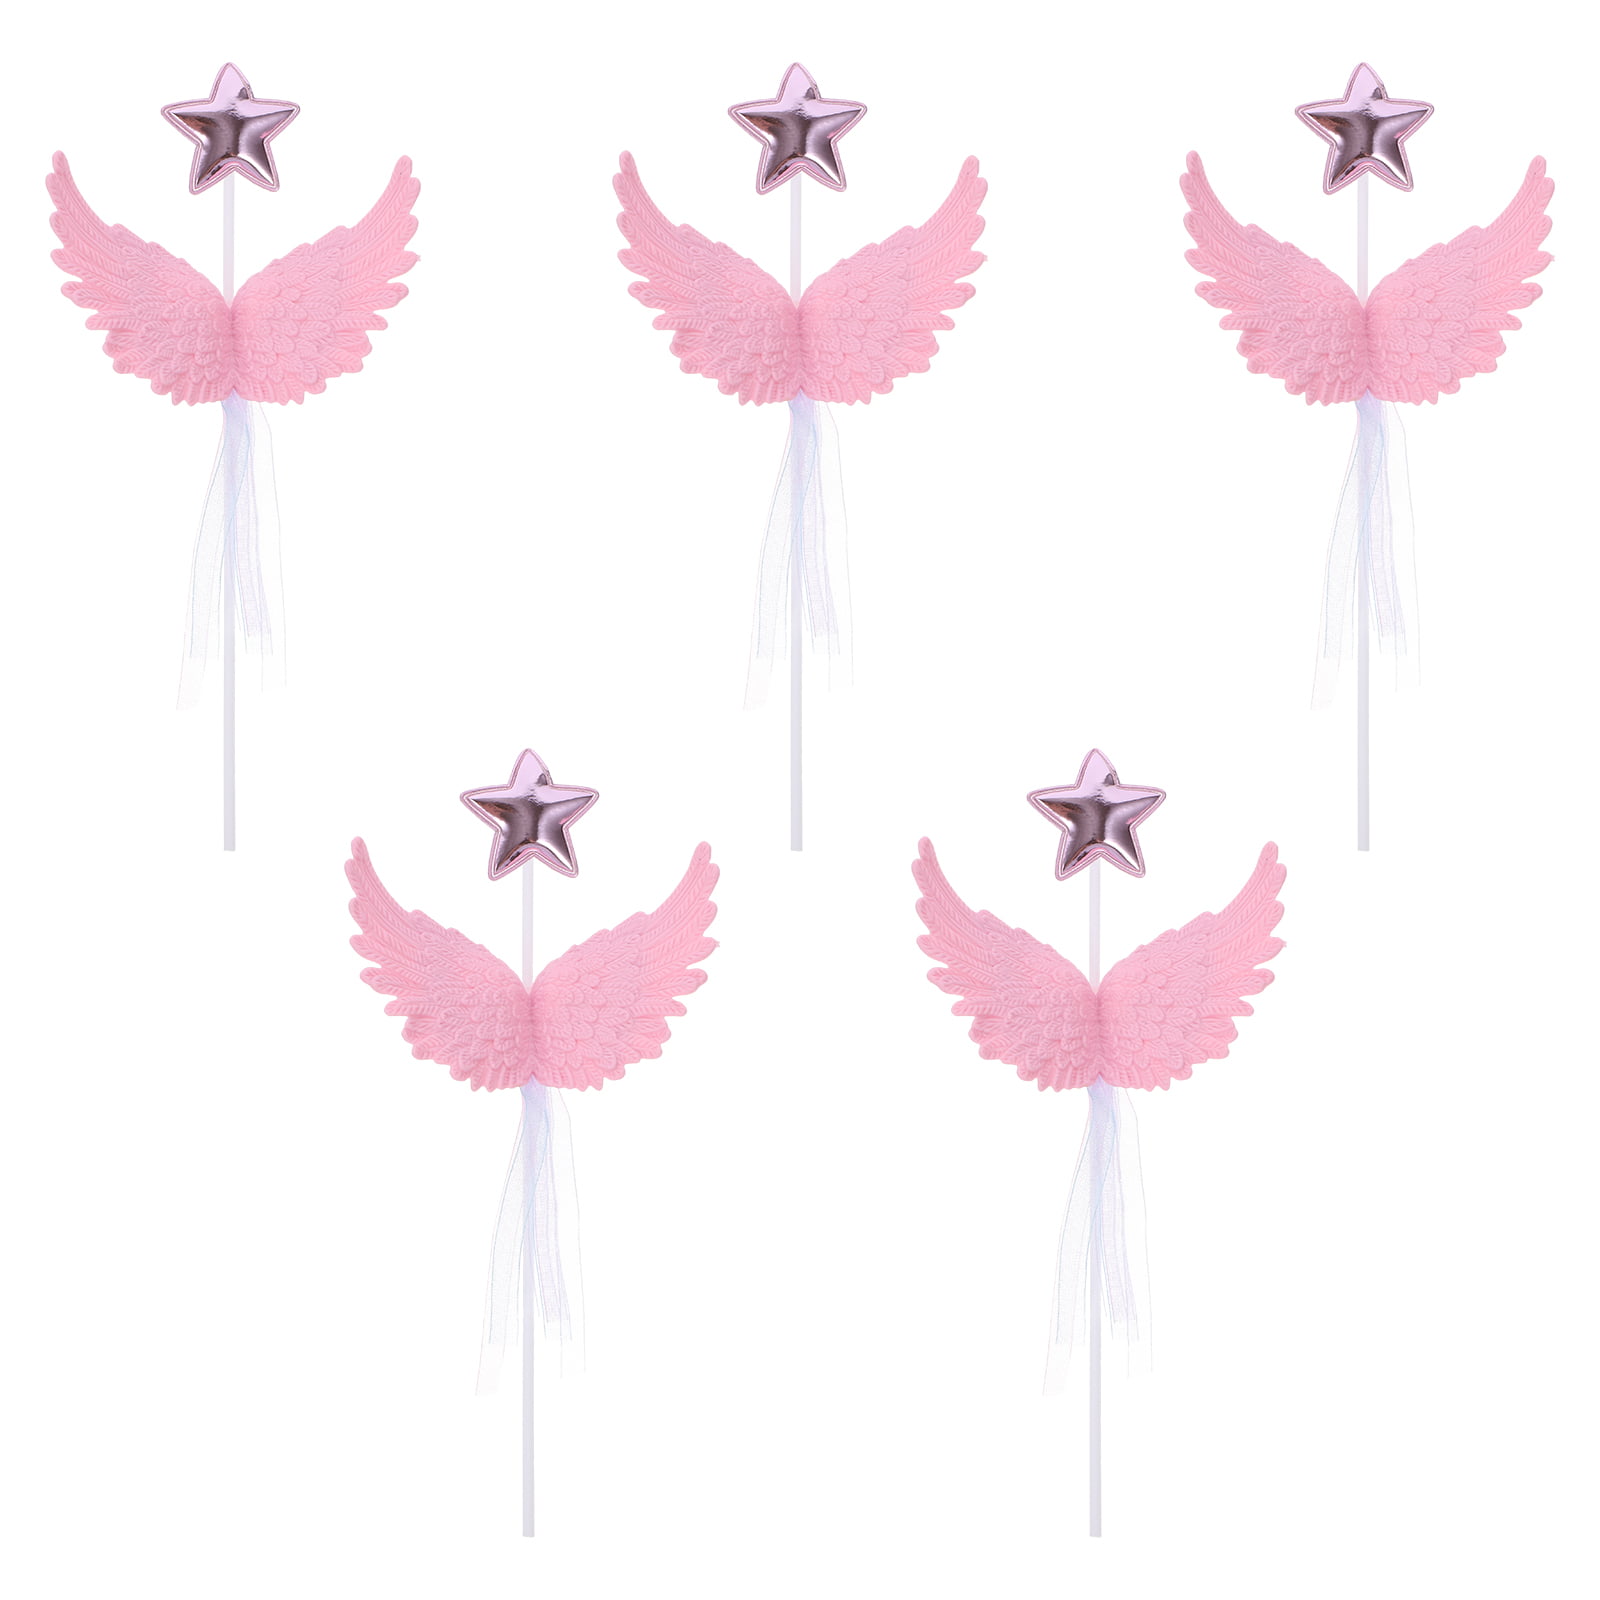 24 PCS Fairy Cupcake Toppers with Glitter Wing Flower Angel Fairy Cupcake  Picks Ballet Dancer Cake Decorations for Wedding Bridal Shower Baby Shower